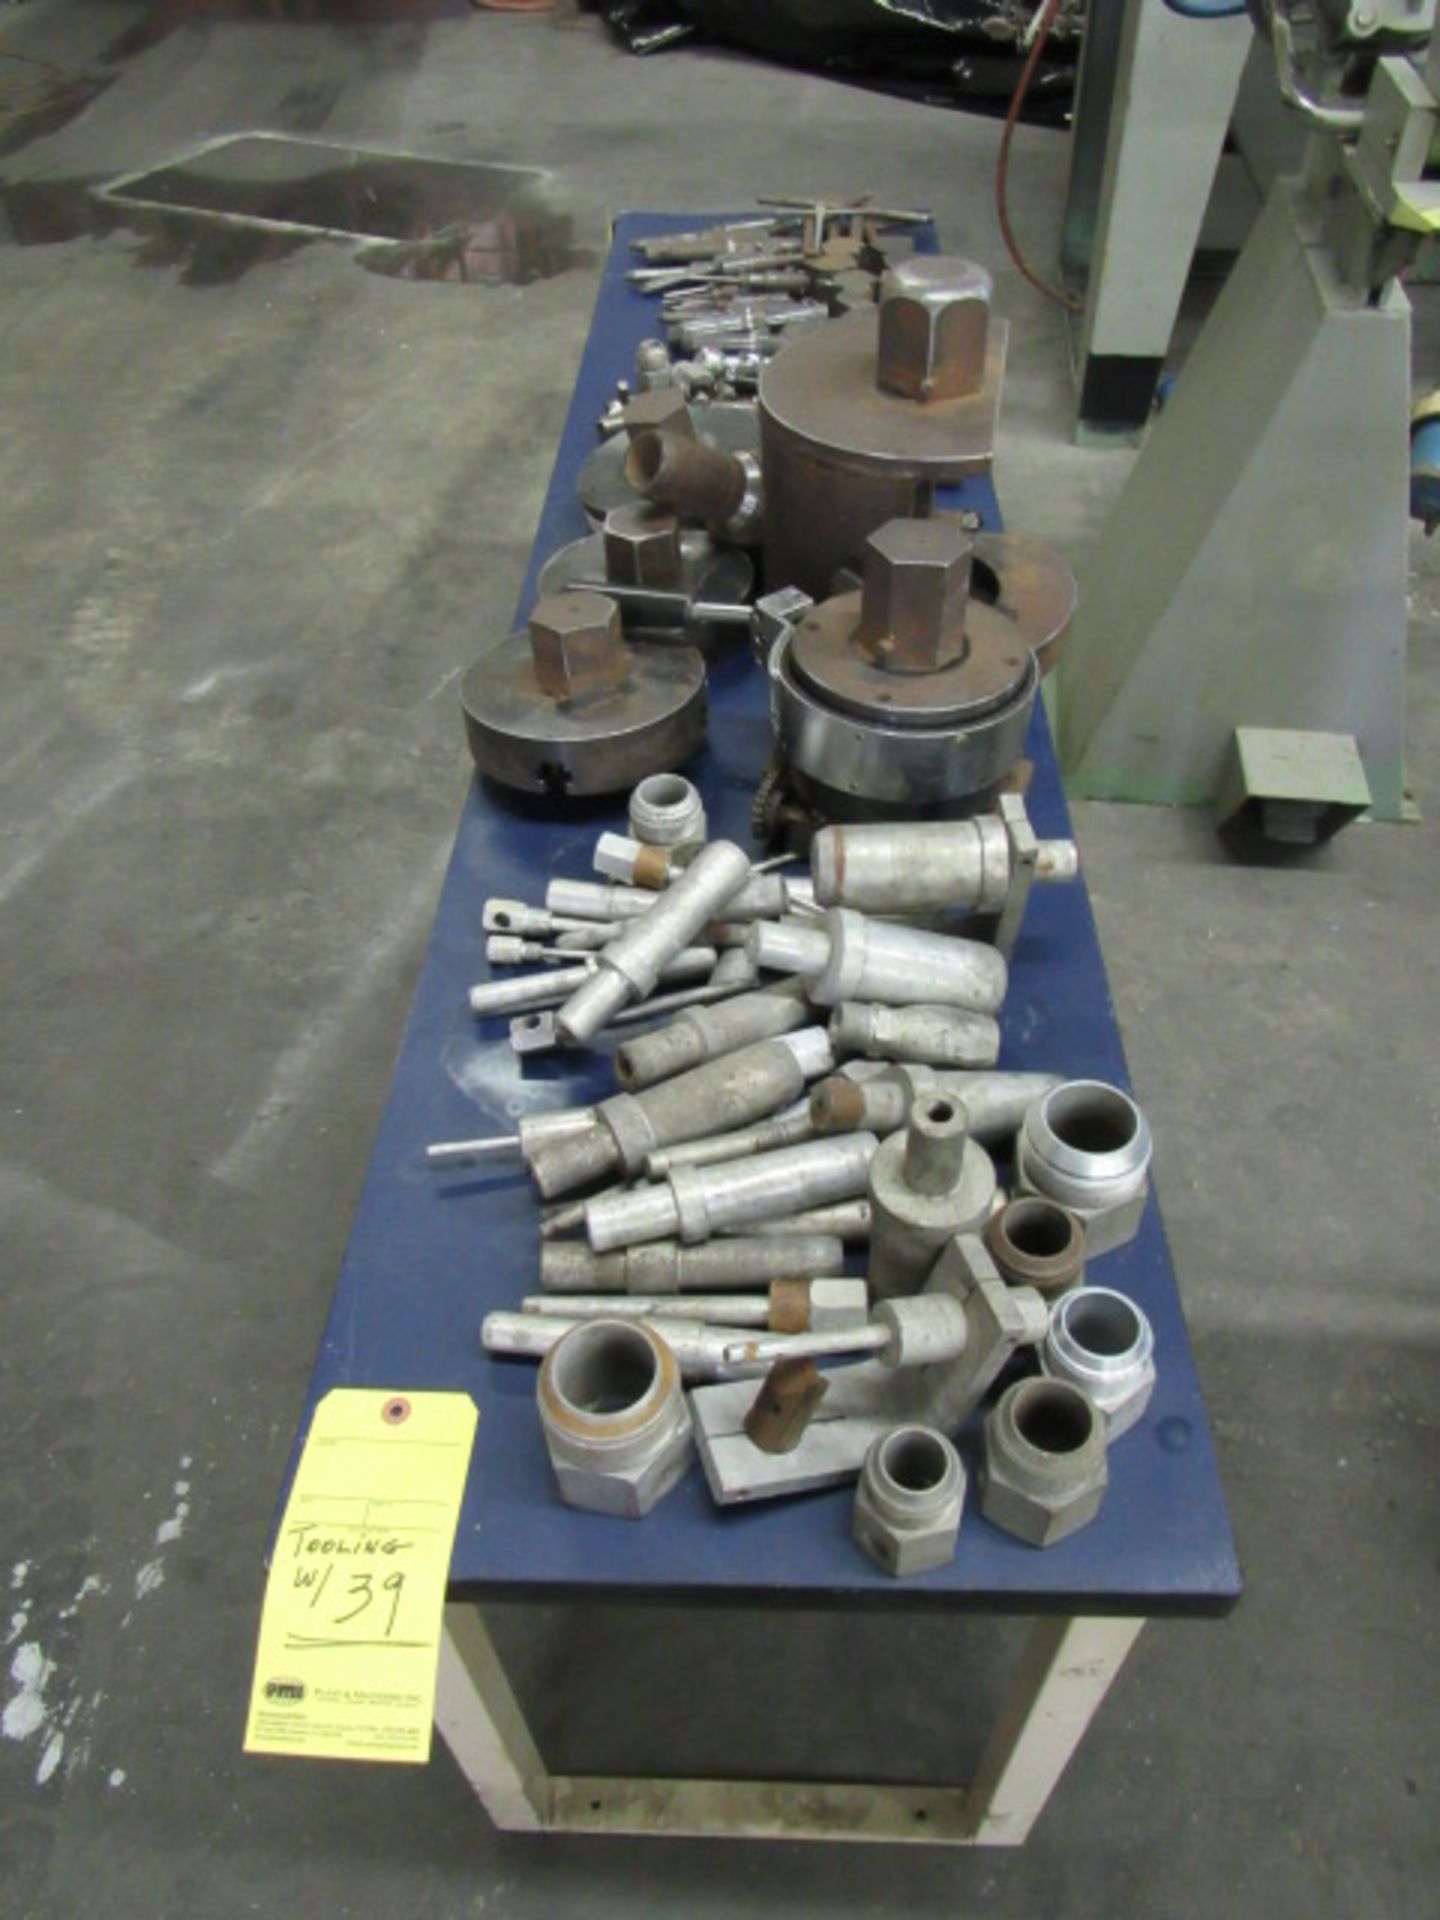 DOG-LEG HOSE ASSEMBLY MACHINE, AEROQUIP MDL. A, new 1985, 4” to 48” cap., large qty. of tooling & - Image 5 of 8